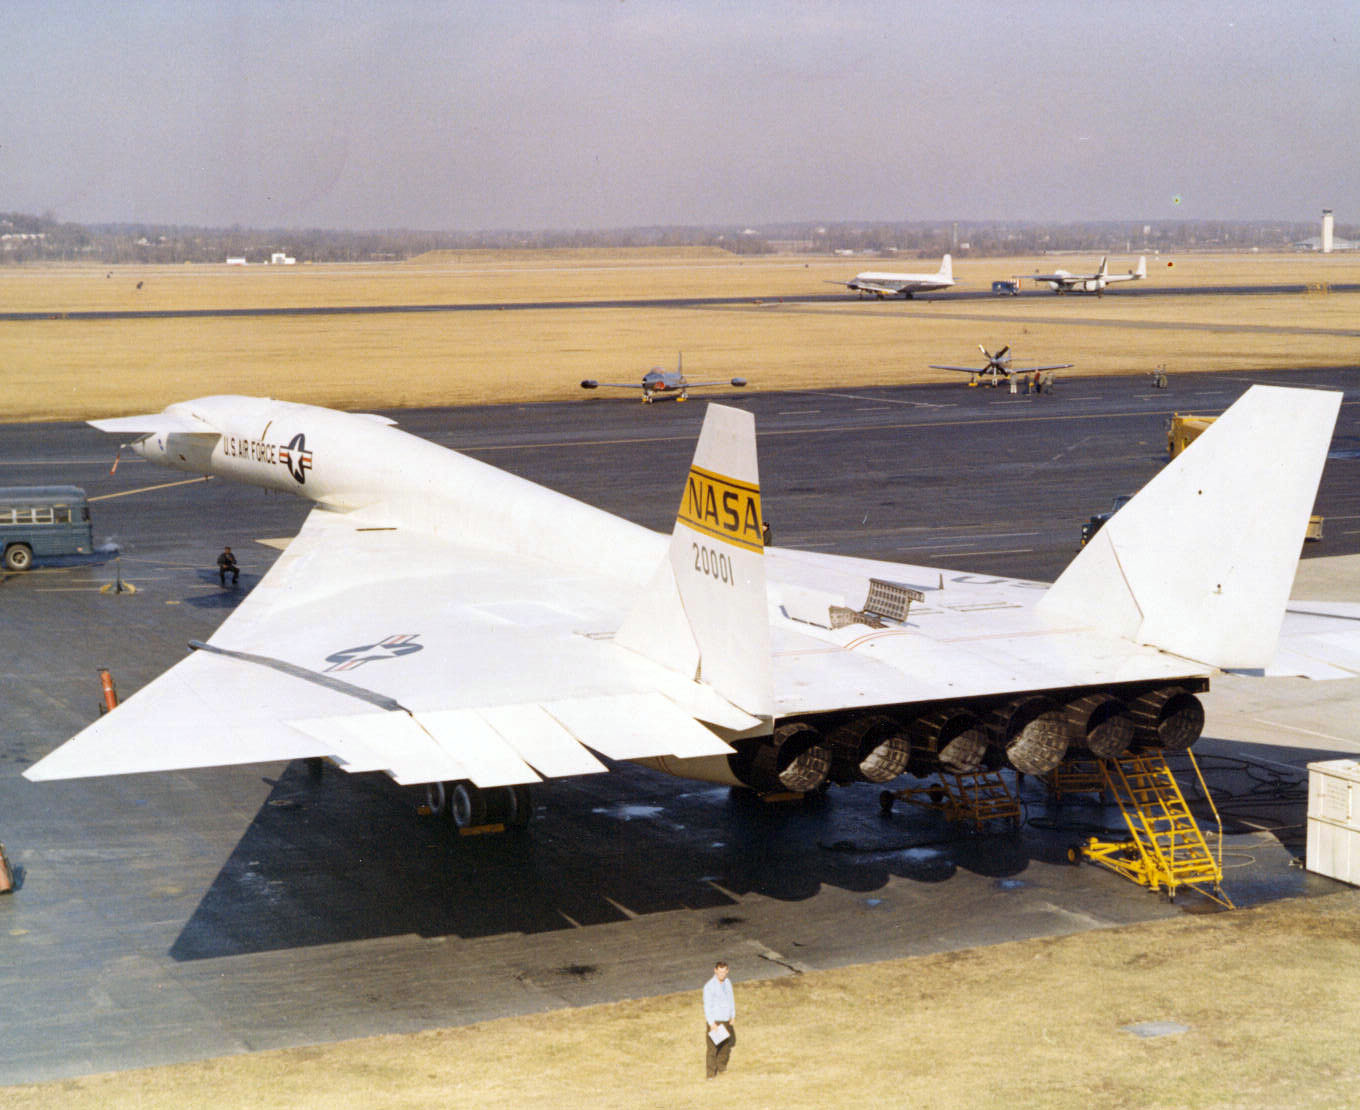 Aviation History | History of Flight | Aviation History Articles, Warbirds, Bombers, Trainers, Pilots | On this Day: XB-70 Valkyrie